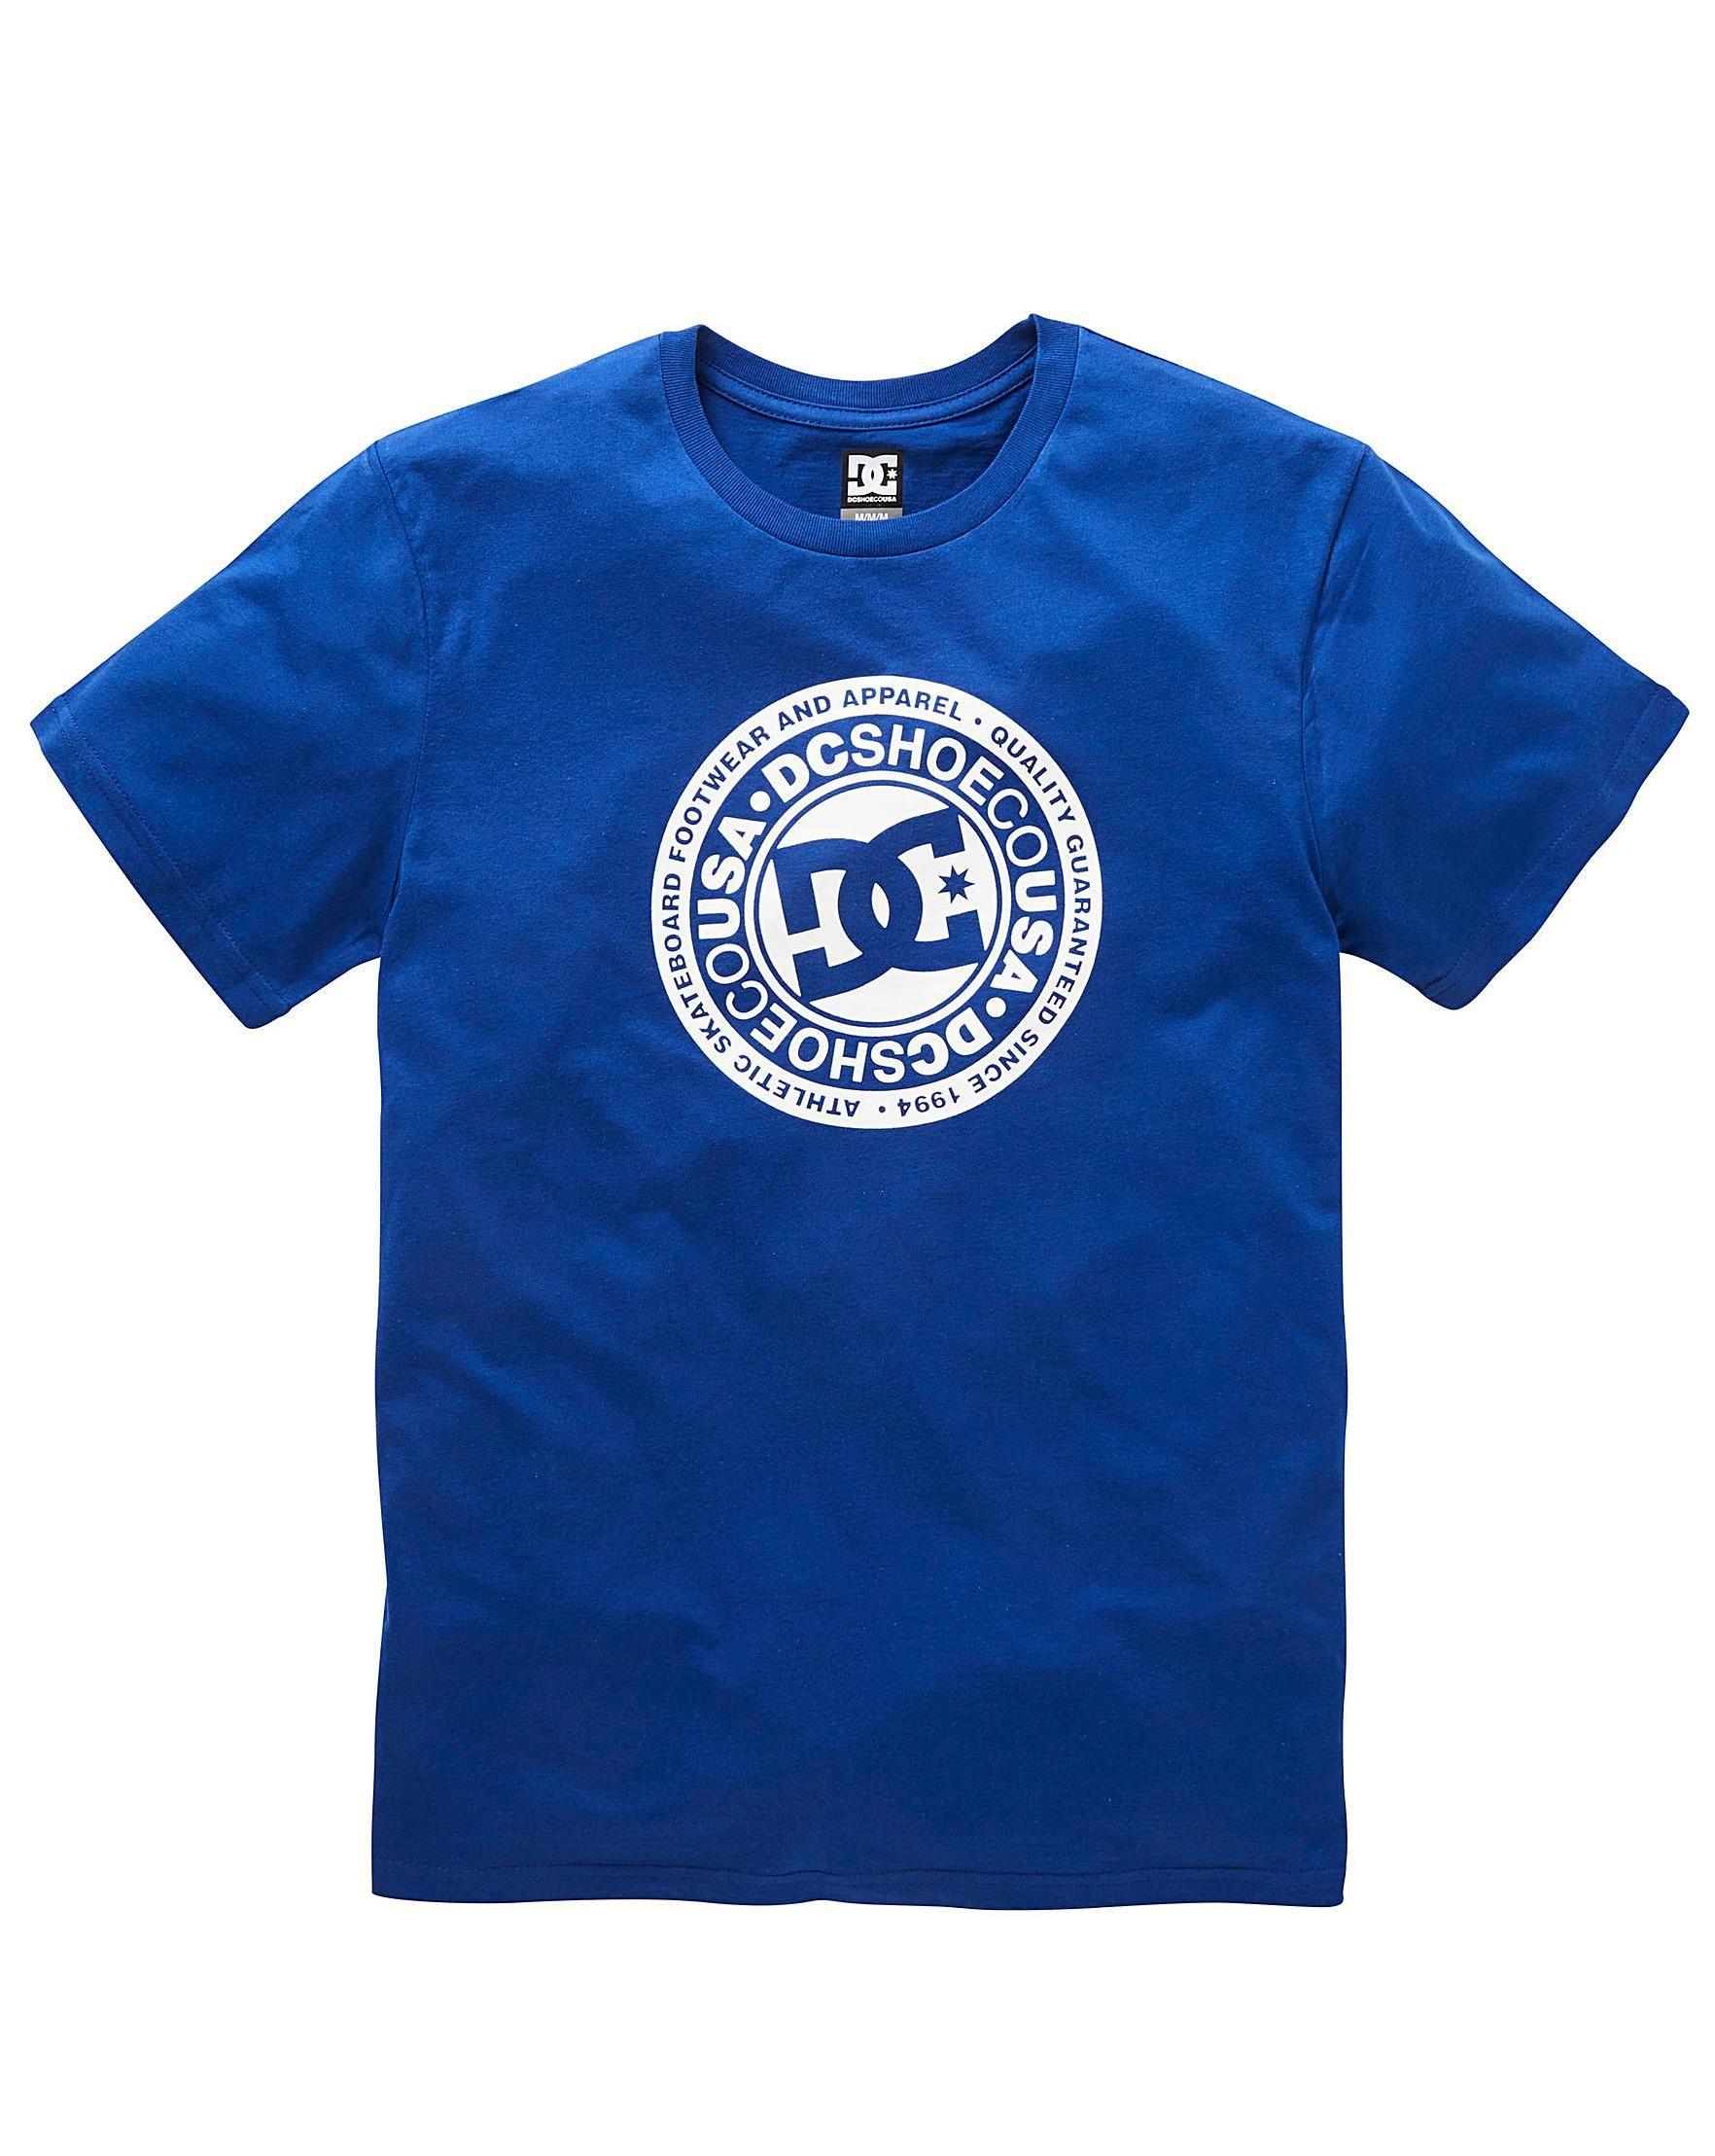 White Blue Circle Star Logo - Dc Shoes Circle Star T-shirt in Blue for Men - Lyst